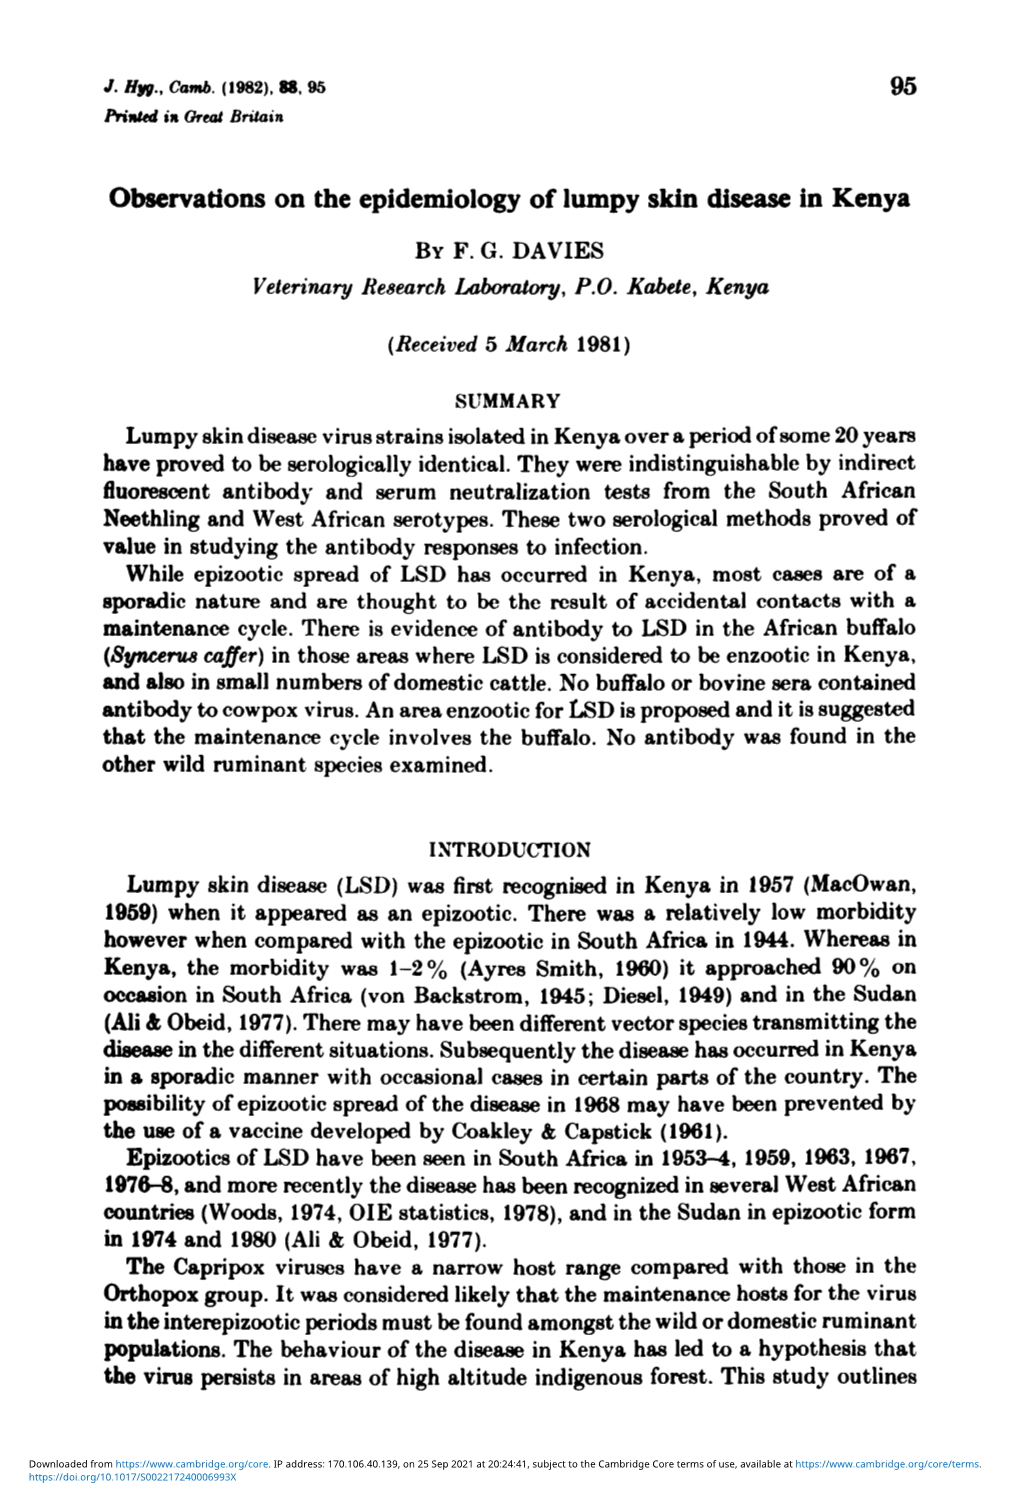 Observations on the Epidemiology of Lumpy Skin Disease in Kenya